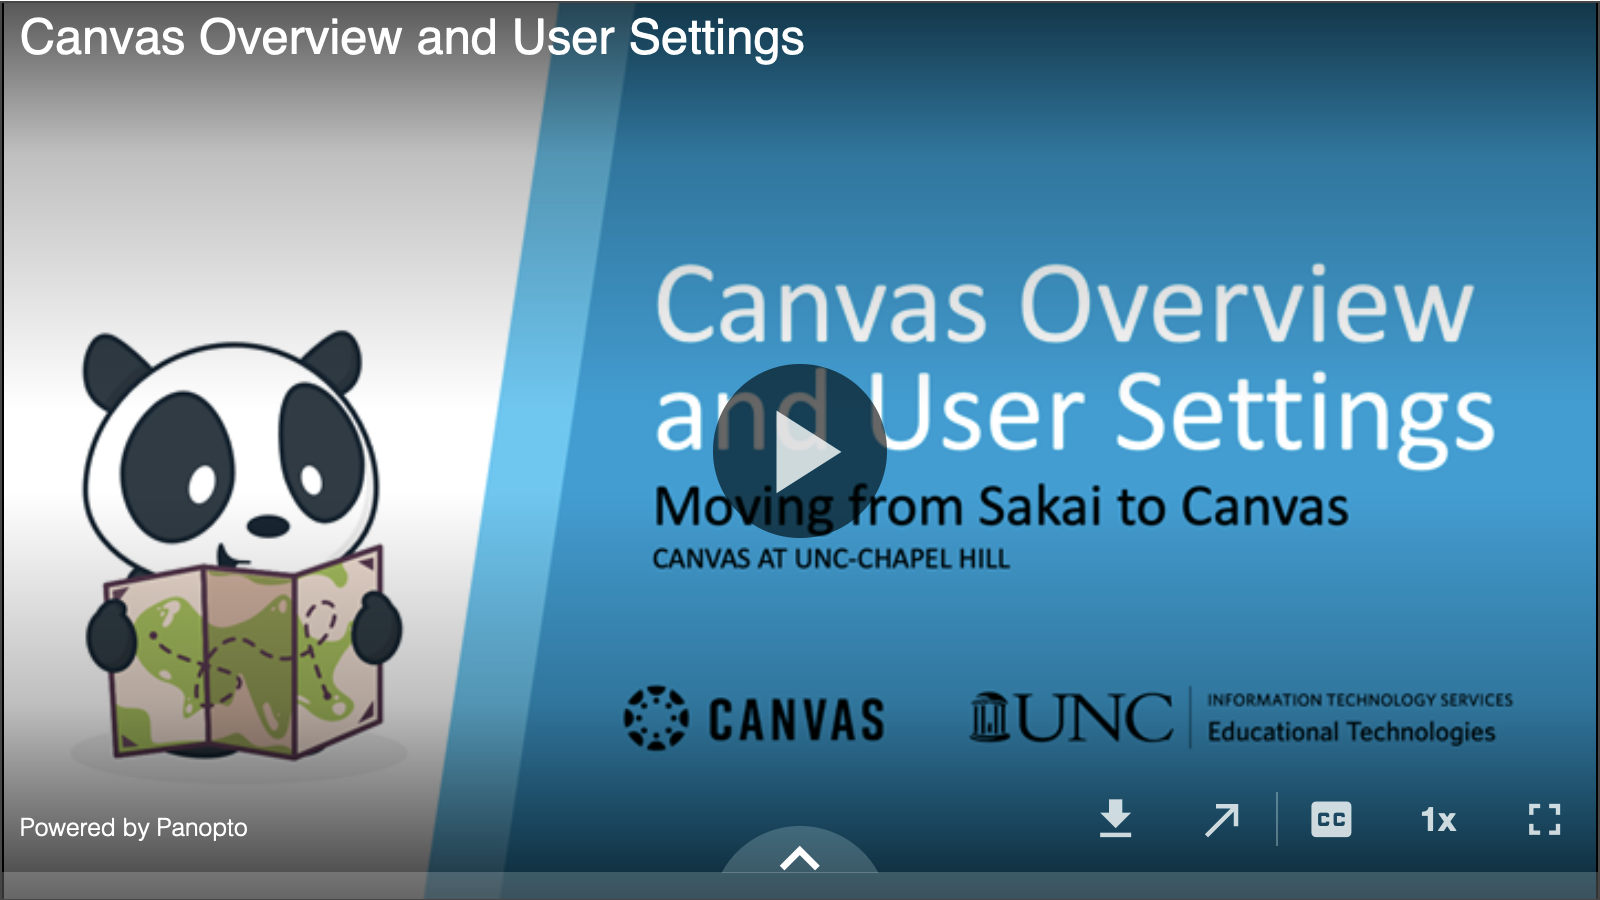 View recording on Canvas overview and user settings